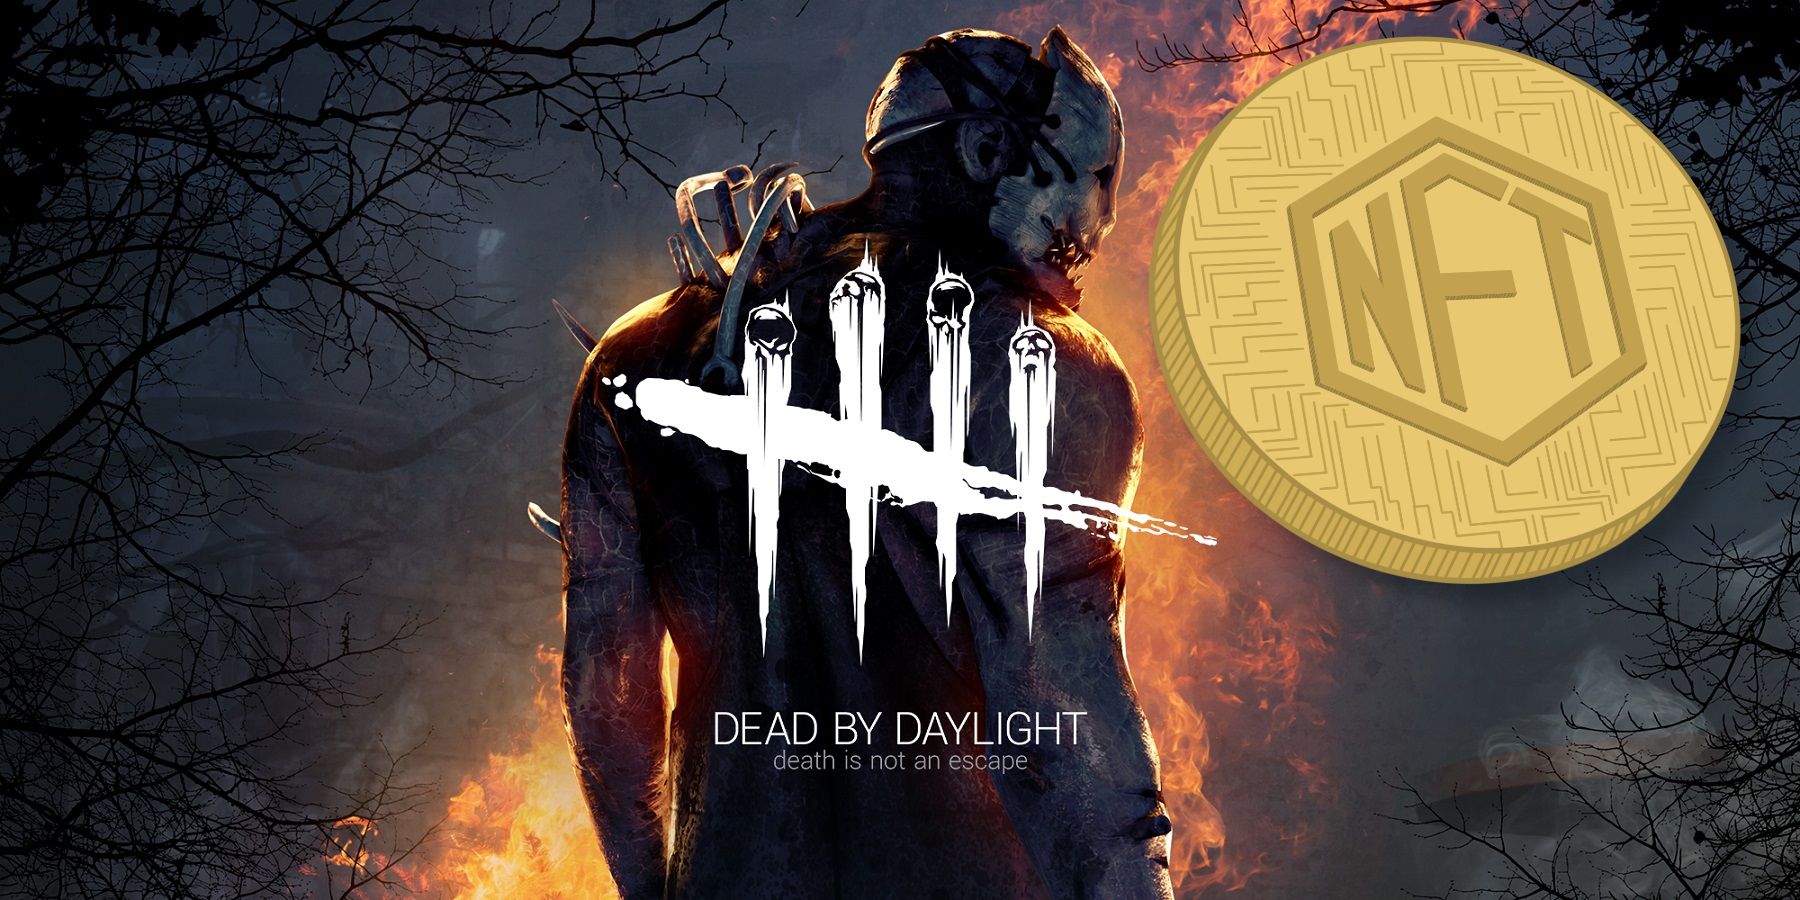 Dead by Daylight boxart with an NFT logo to the side.